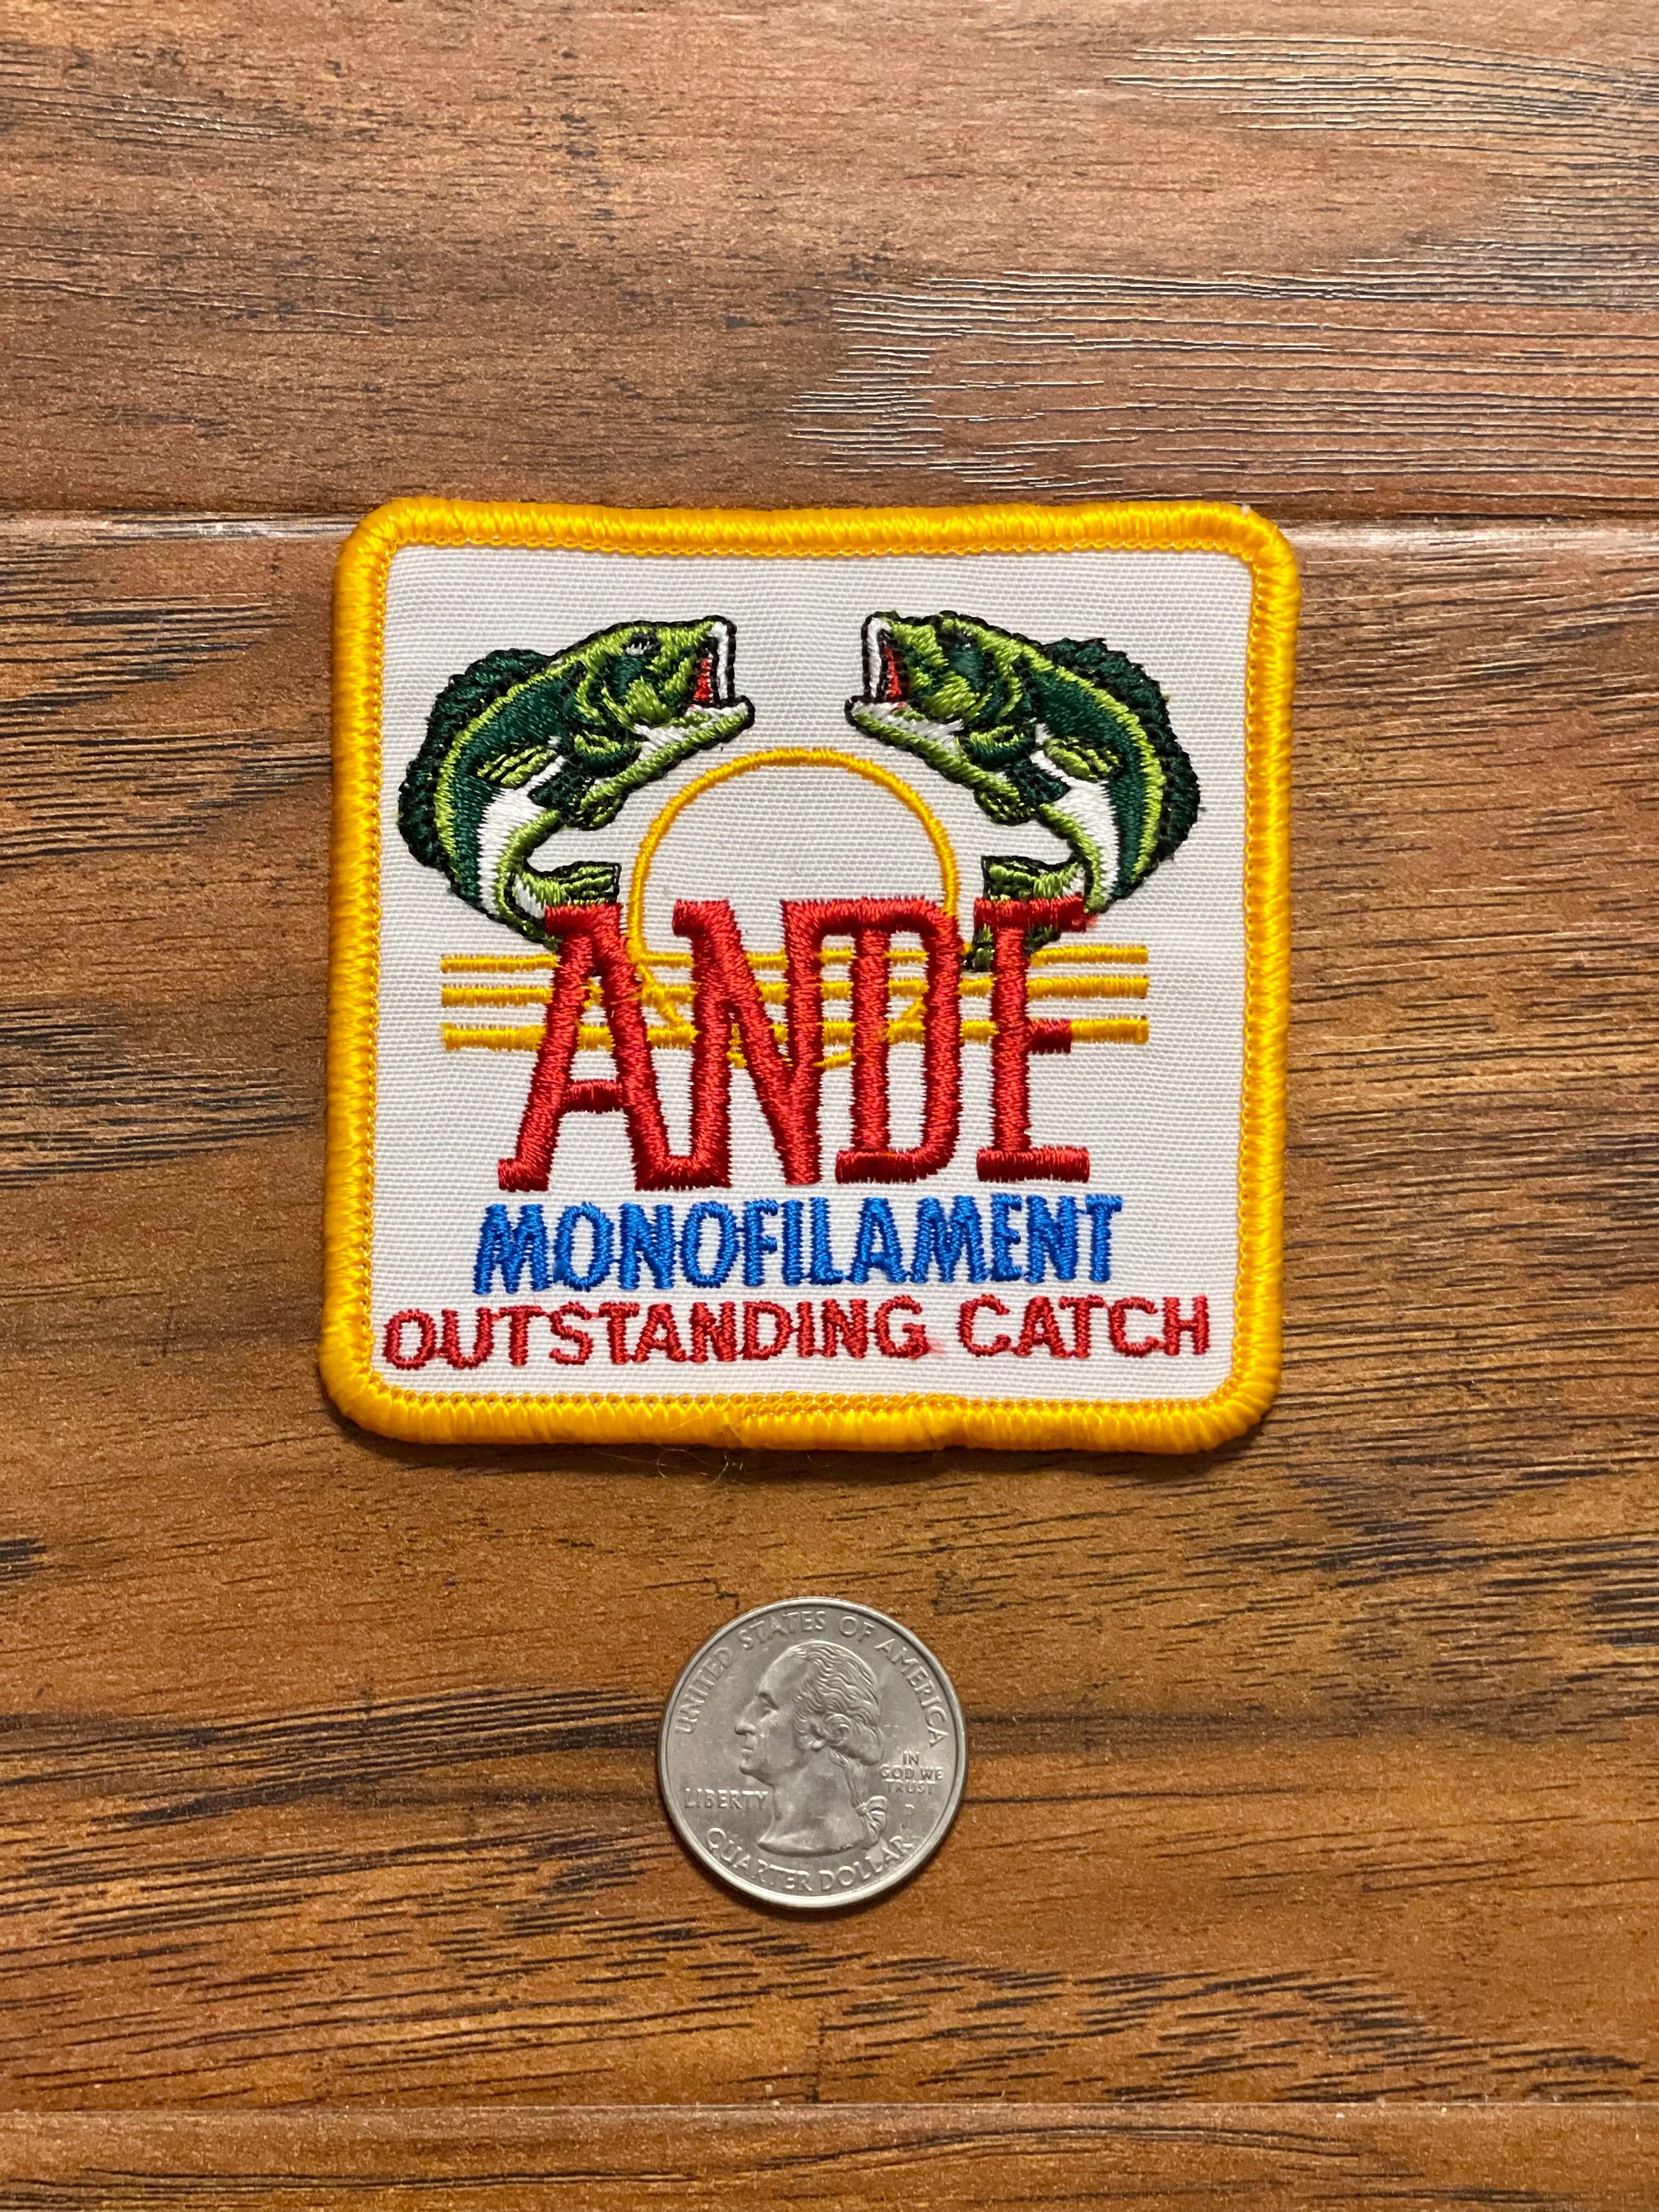 Vintage ANDE Monofilament Outstanding Catch